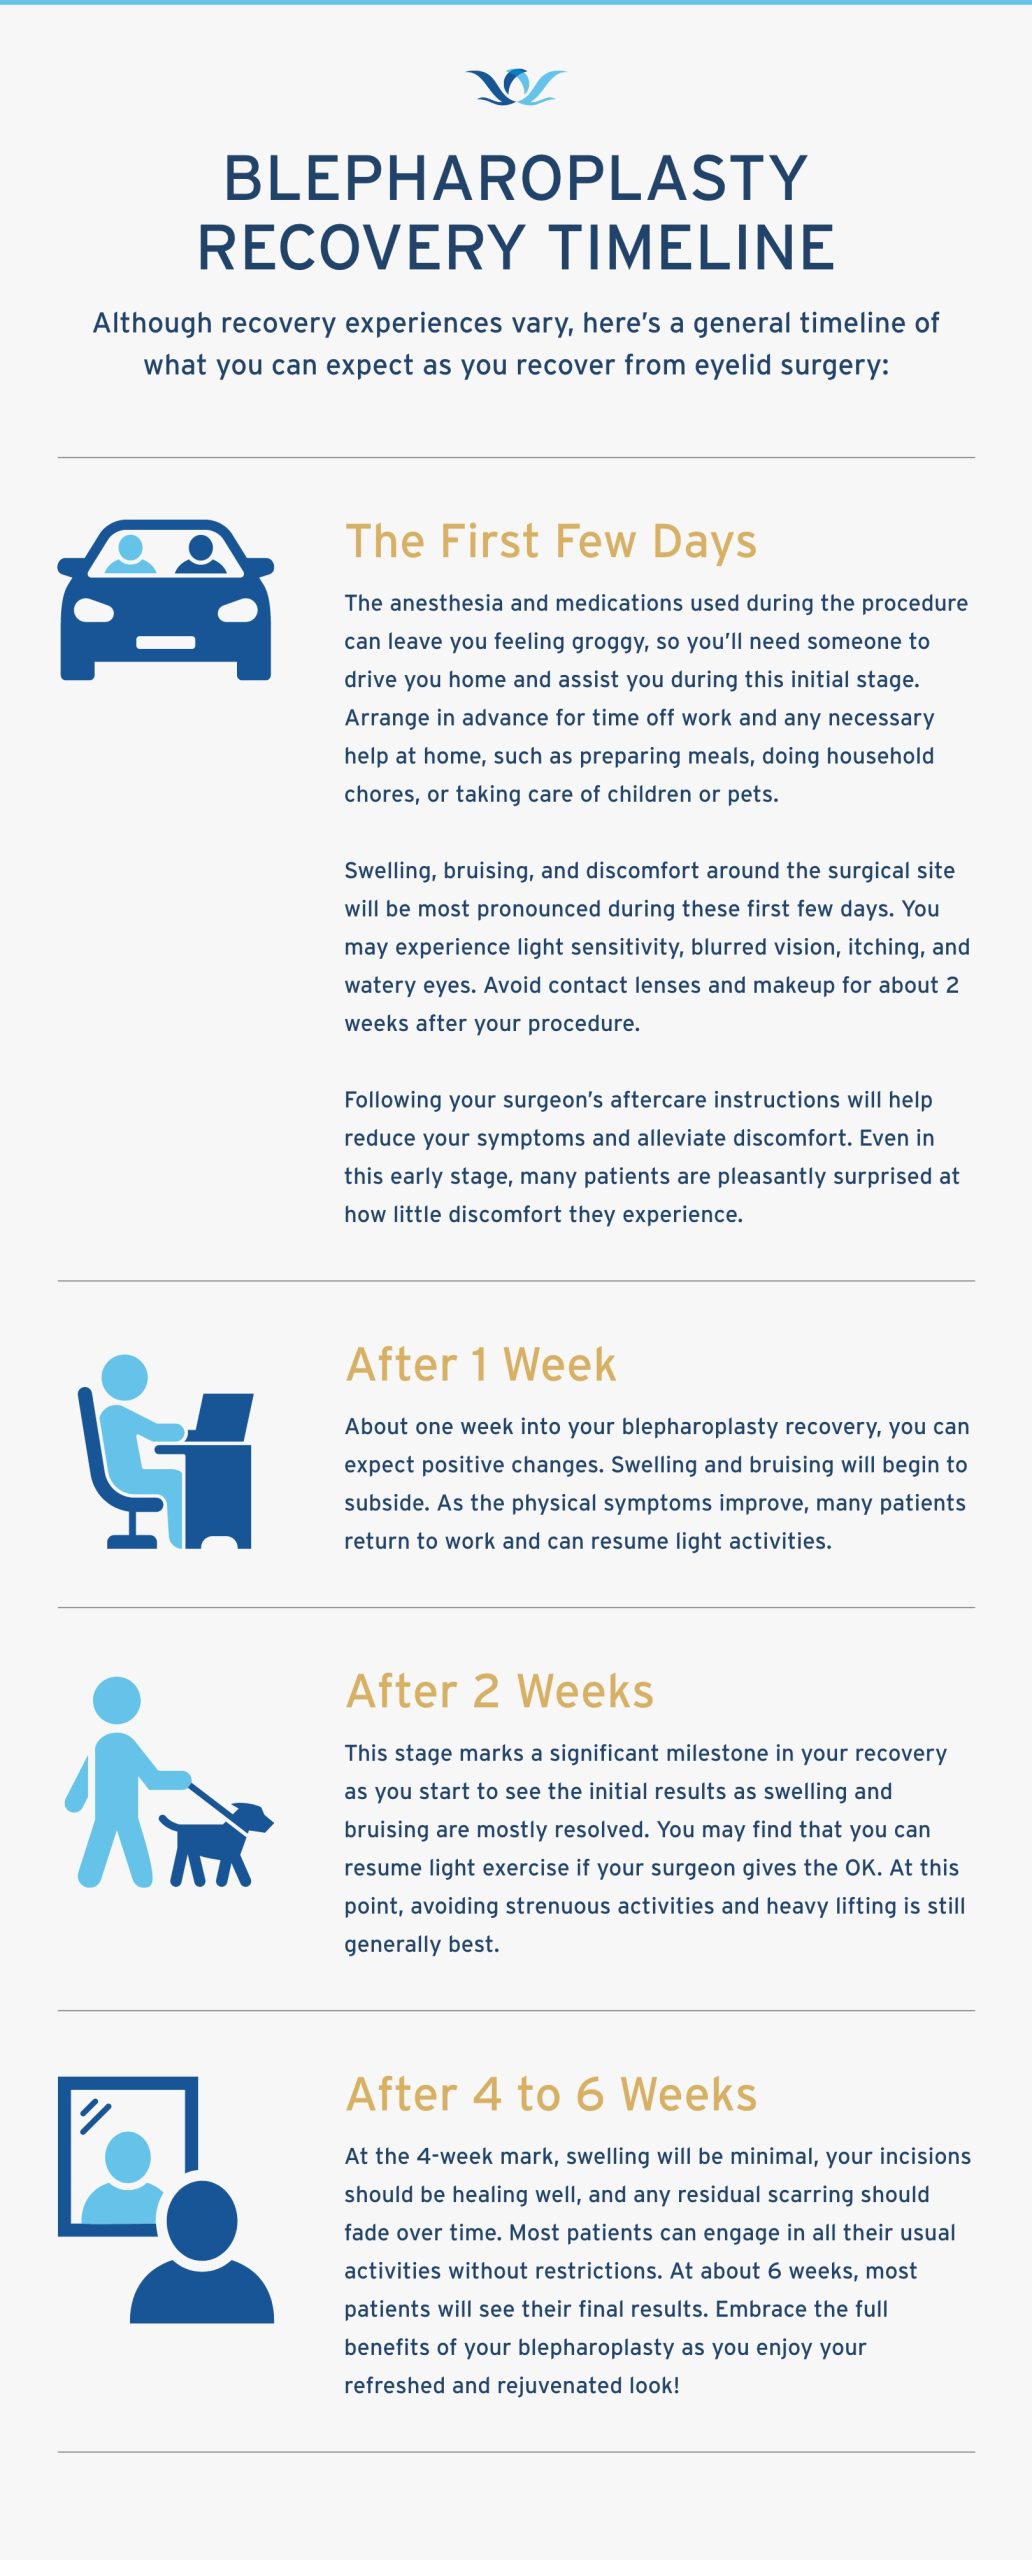 Infographic outlining the recovery timeline of blepharoplasty surgery at Youthful Reflections in Nashville, TN